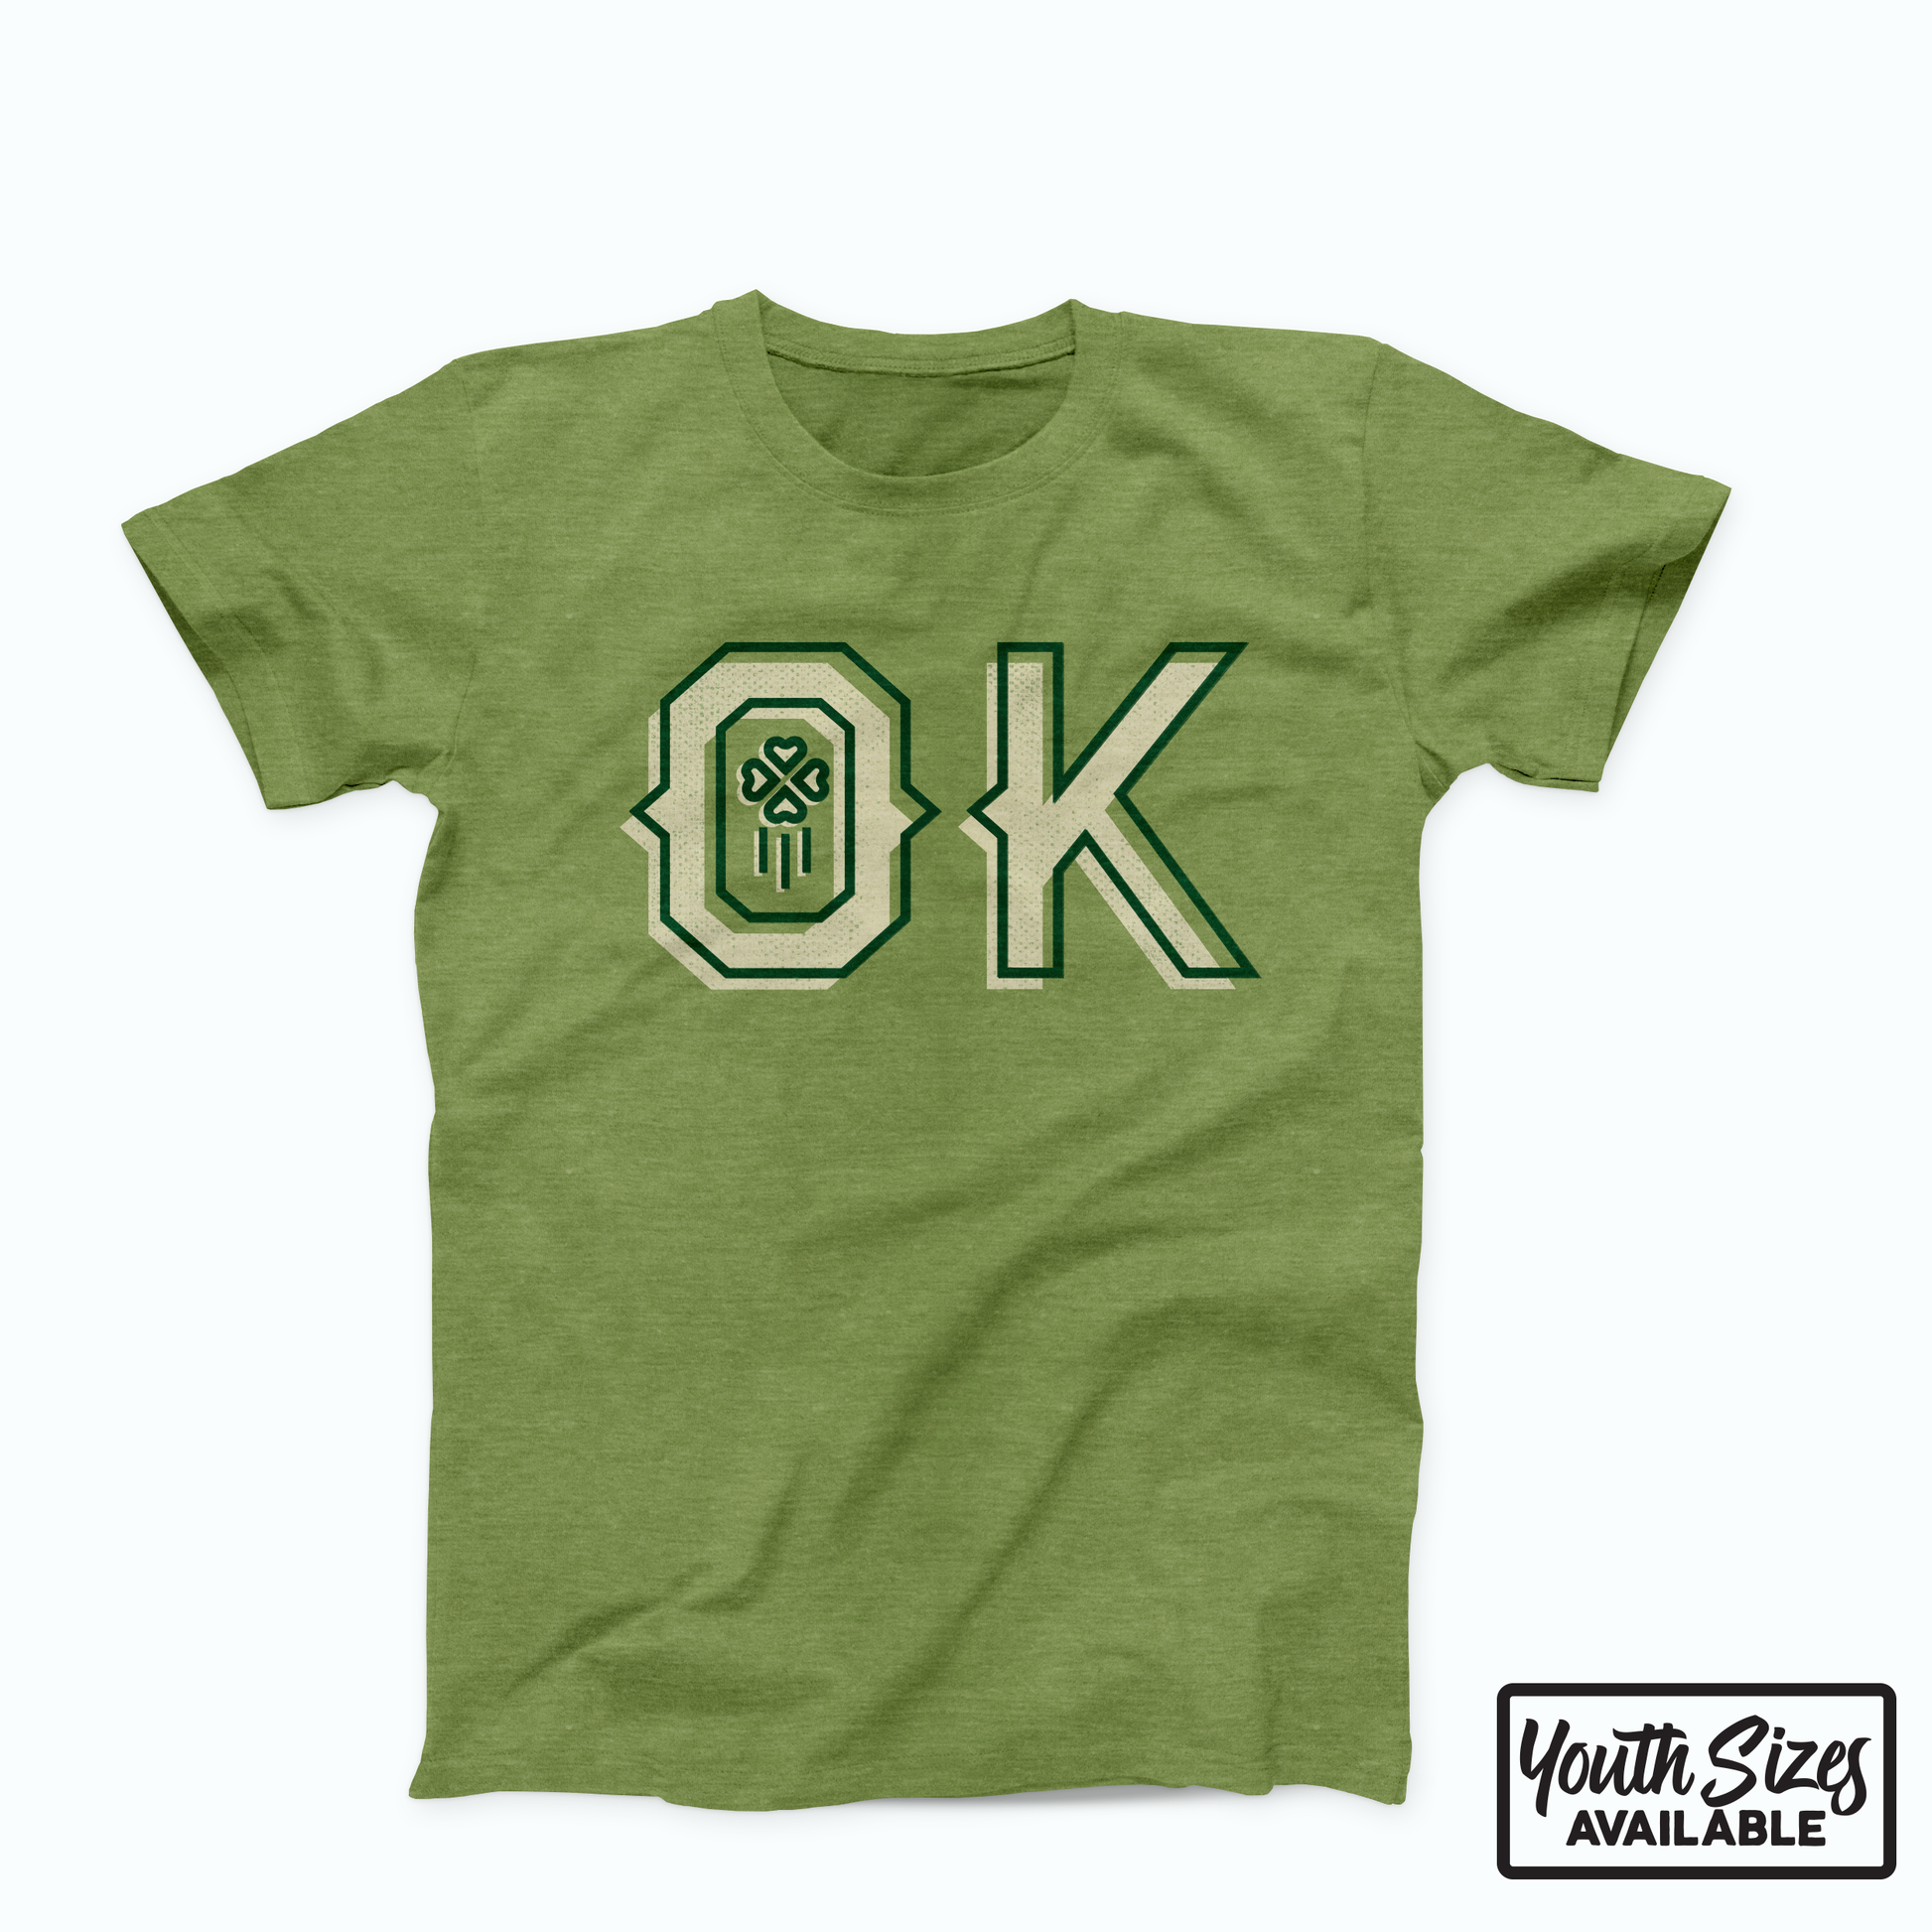 Heather Green Oklahoma t-shirt. Screen printed in cream and dark green is "OK" across the chest. Within the "O" is a 4 leaf clover with 3 thin lines below it vertically. 